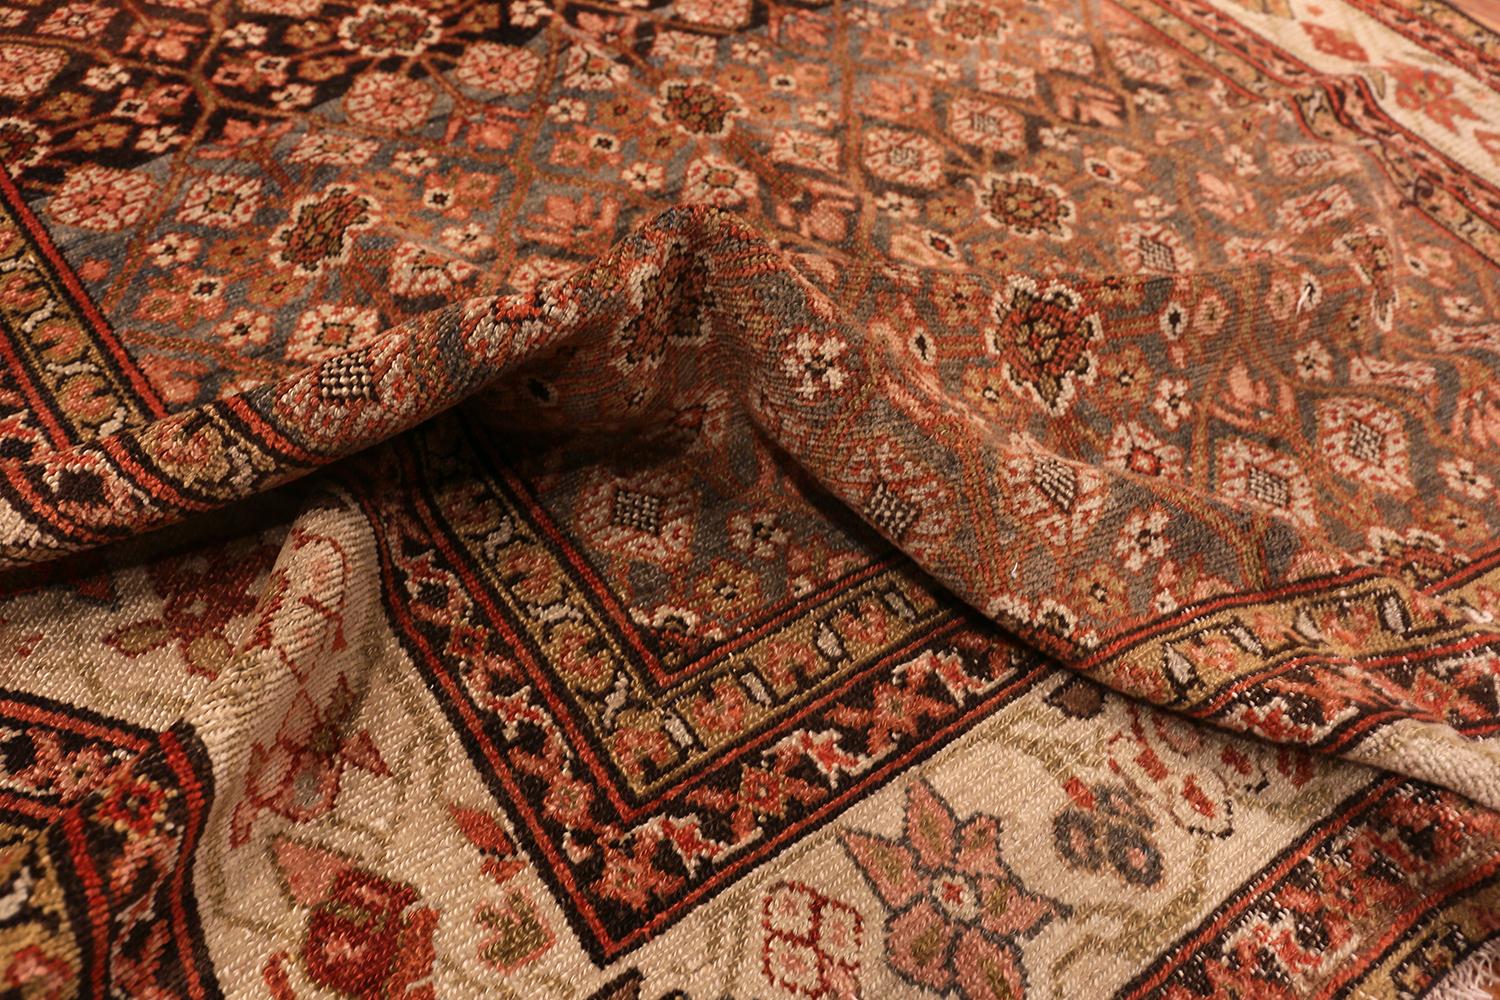 20th Century Antique Persian Malayer Runner Rug. Size: 5 ft 2 in x 16 ft 7 in